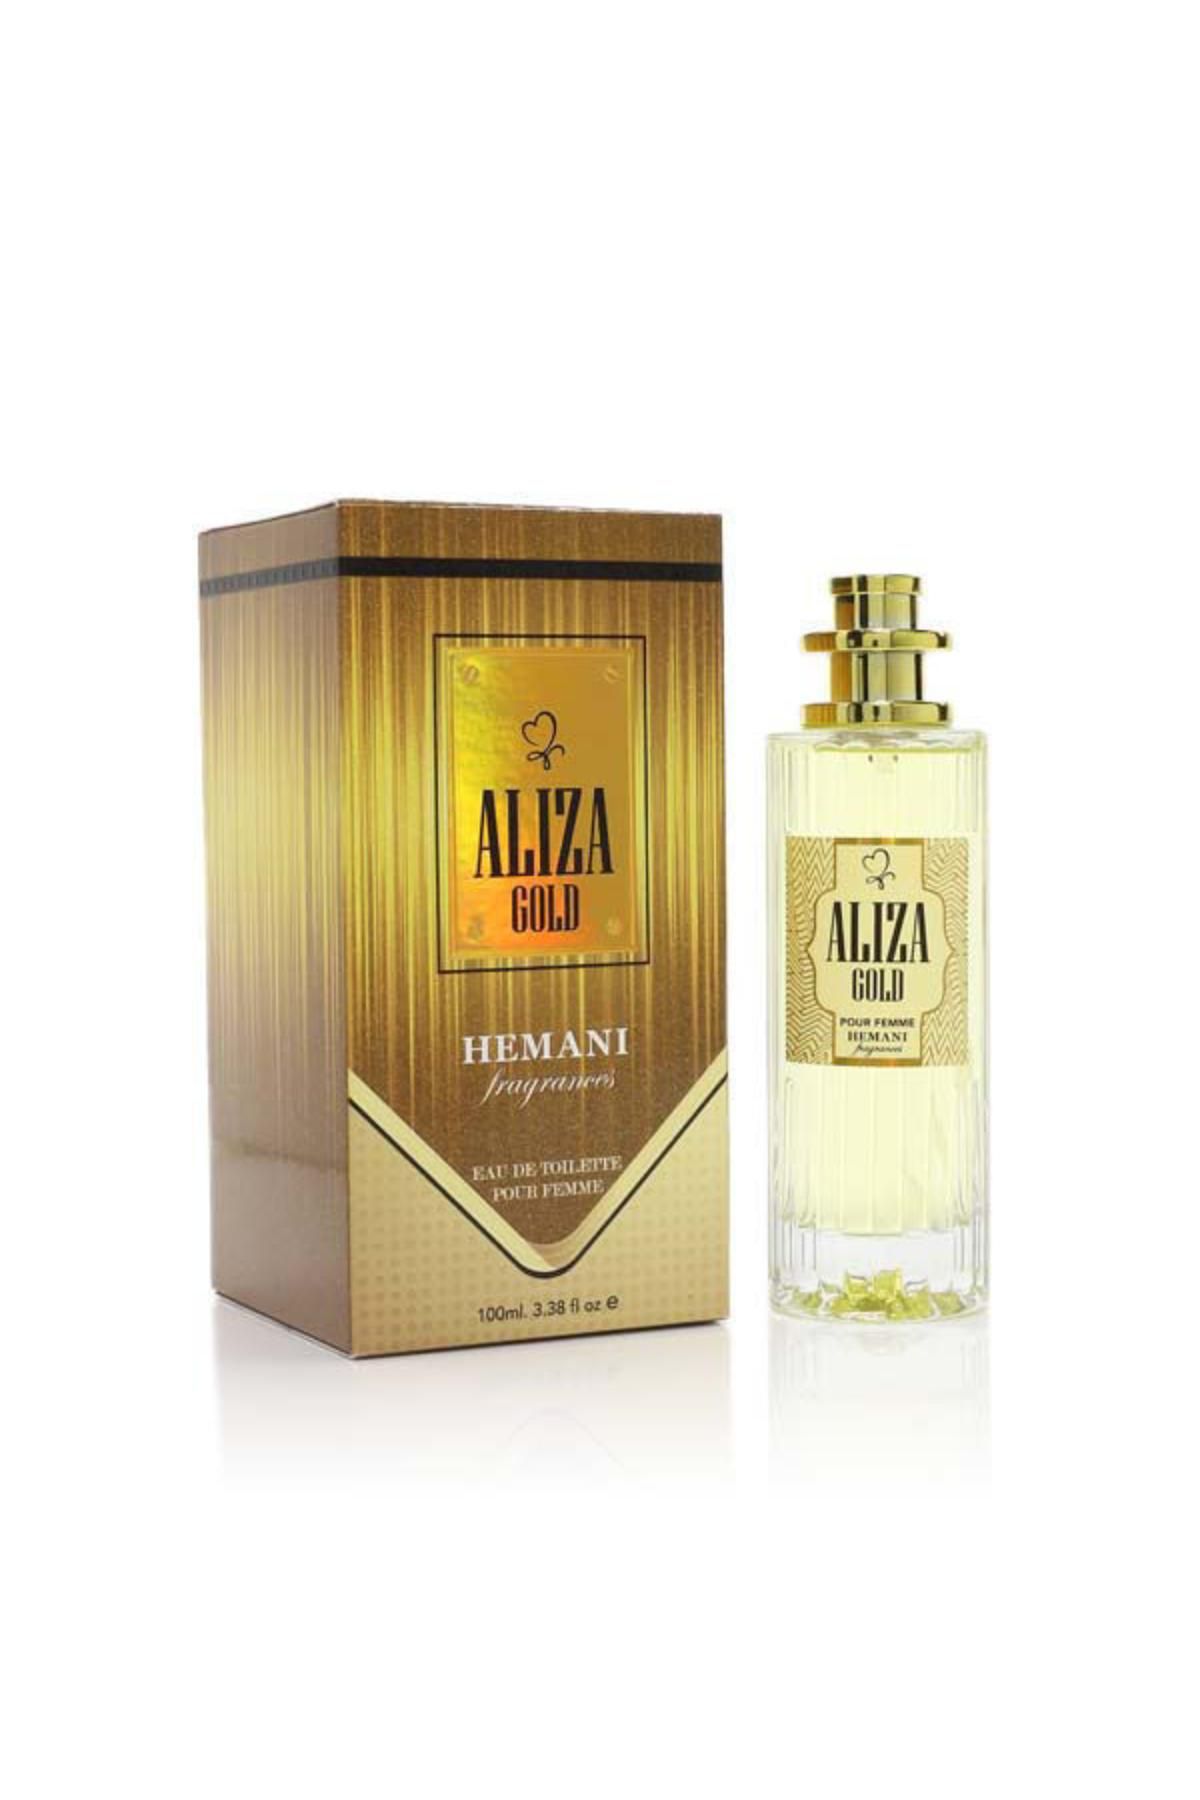 Alize by Biobellinda » Reviews & Perfume Facts